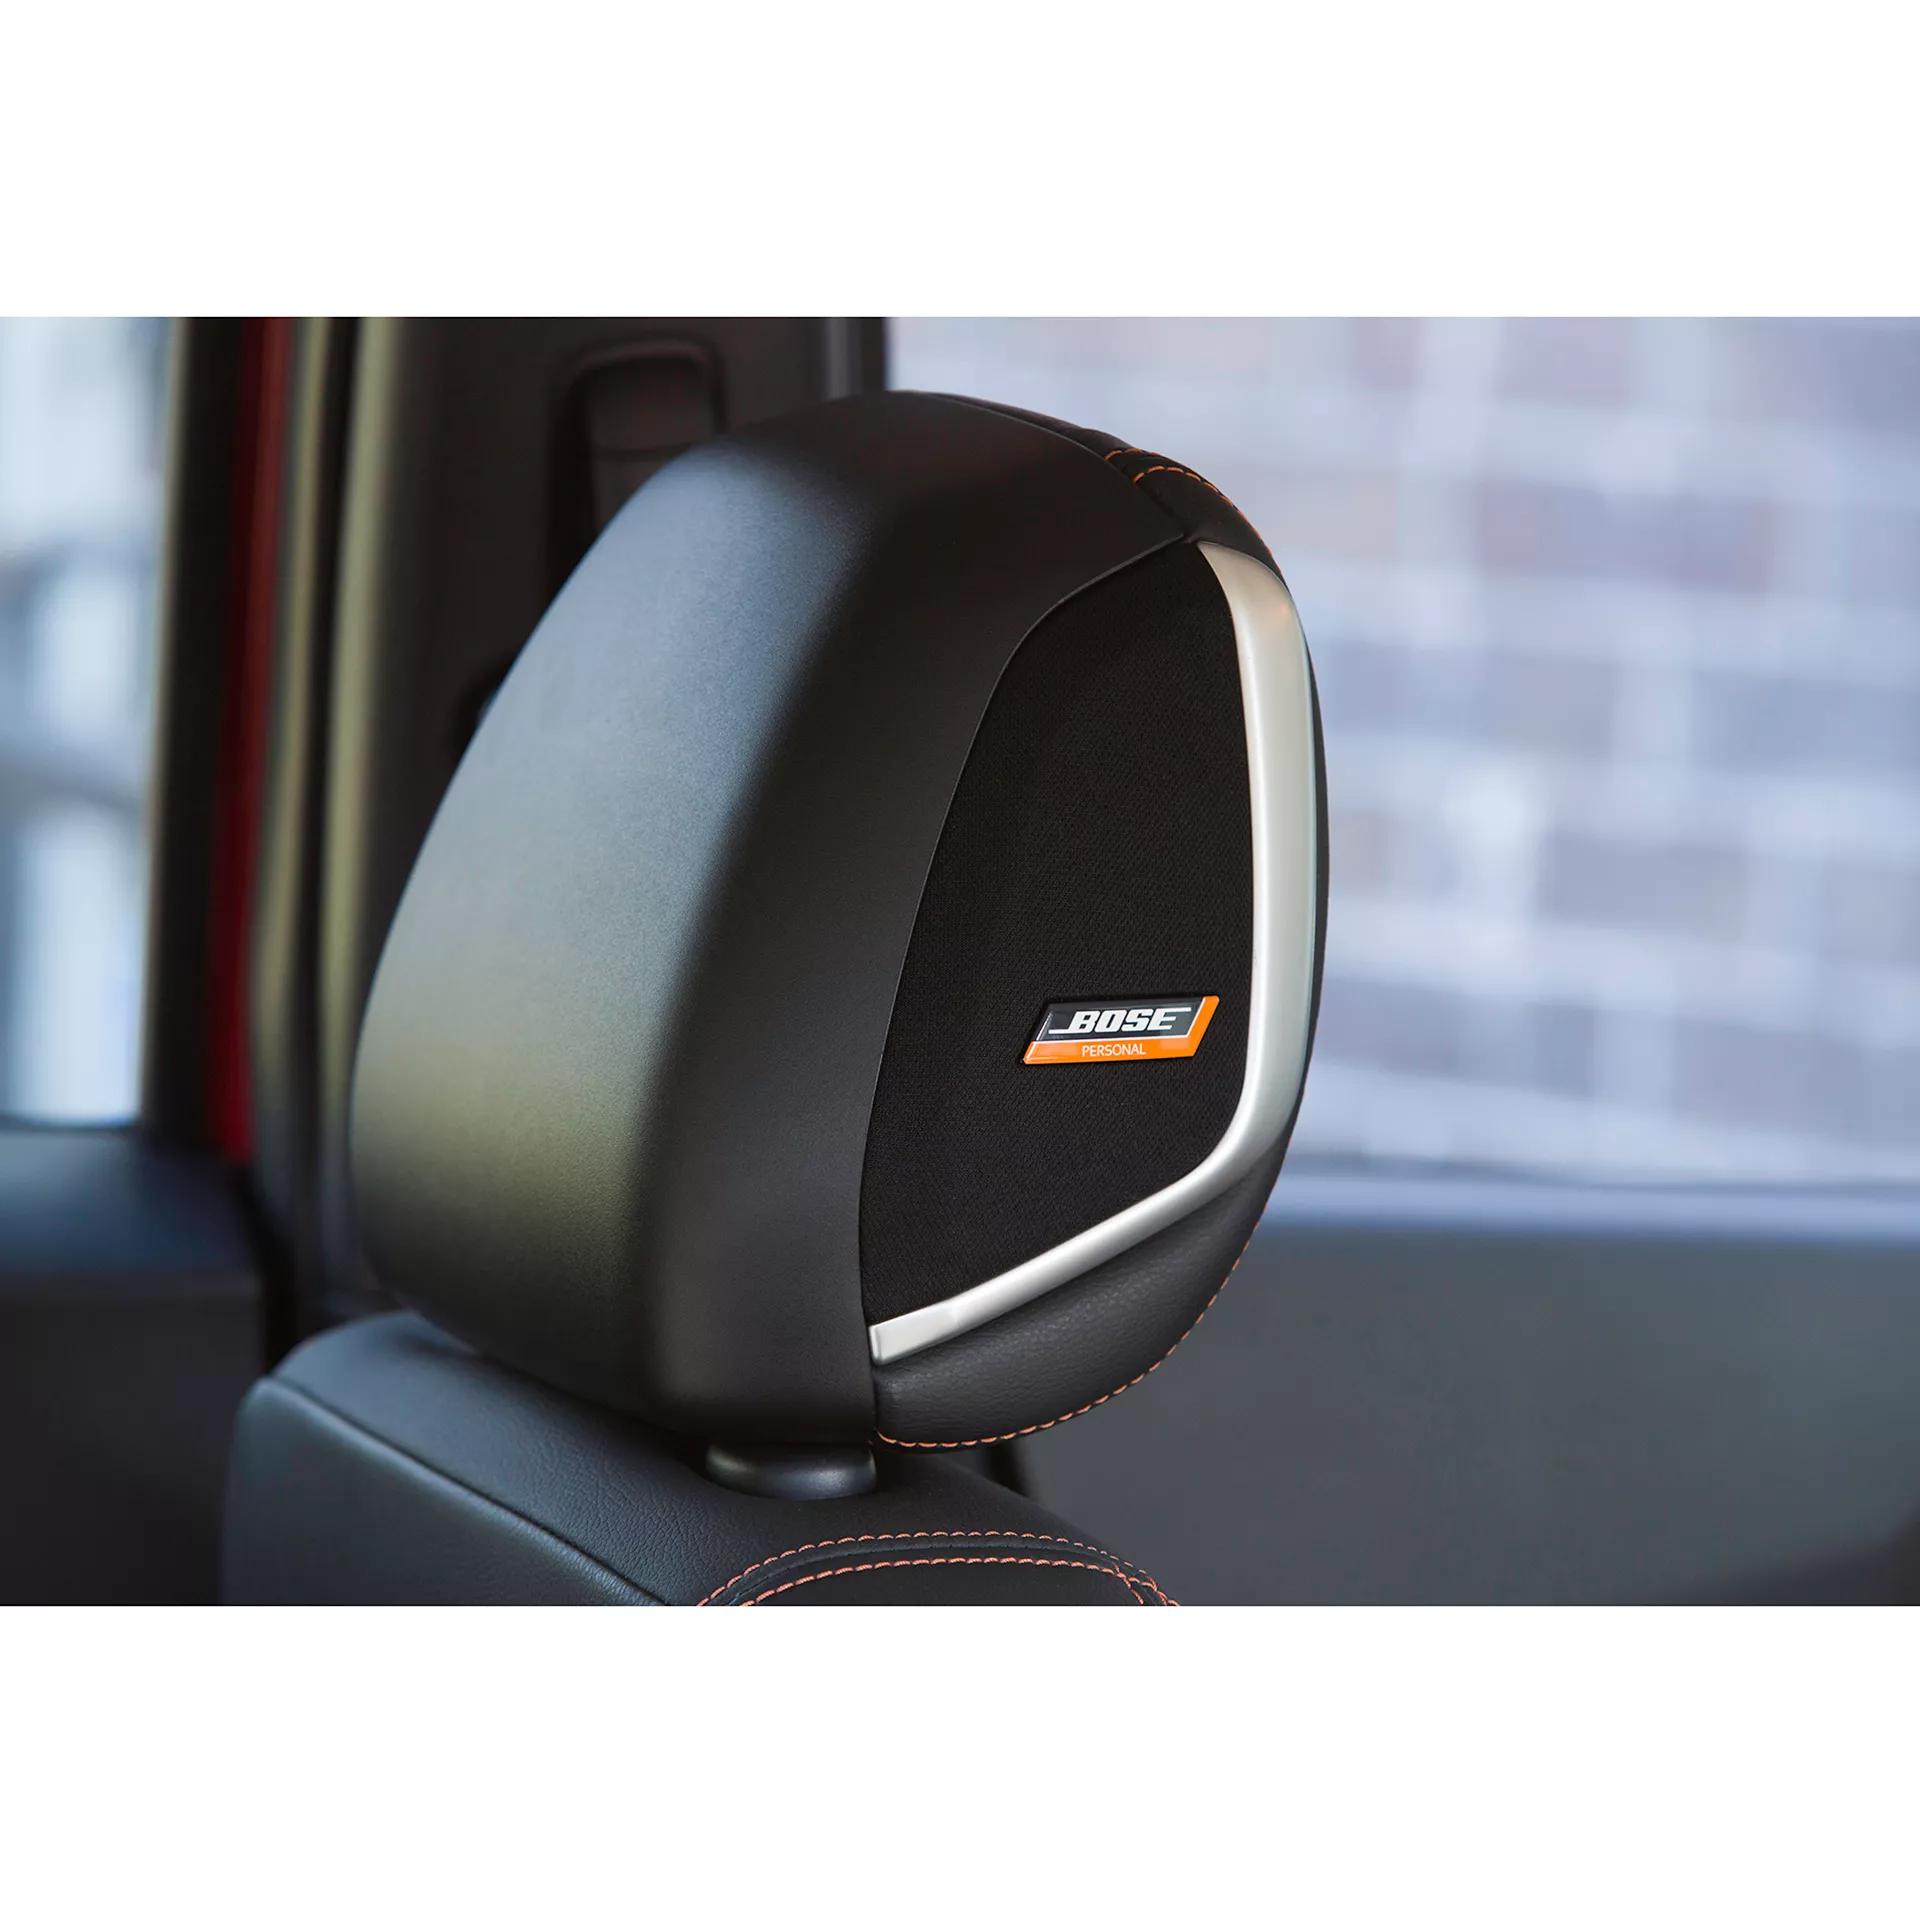 The Bose Personal Plus system for the 2018 Nissan Kicks